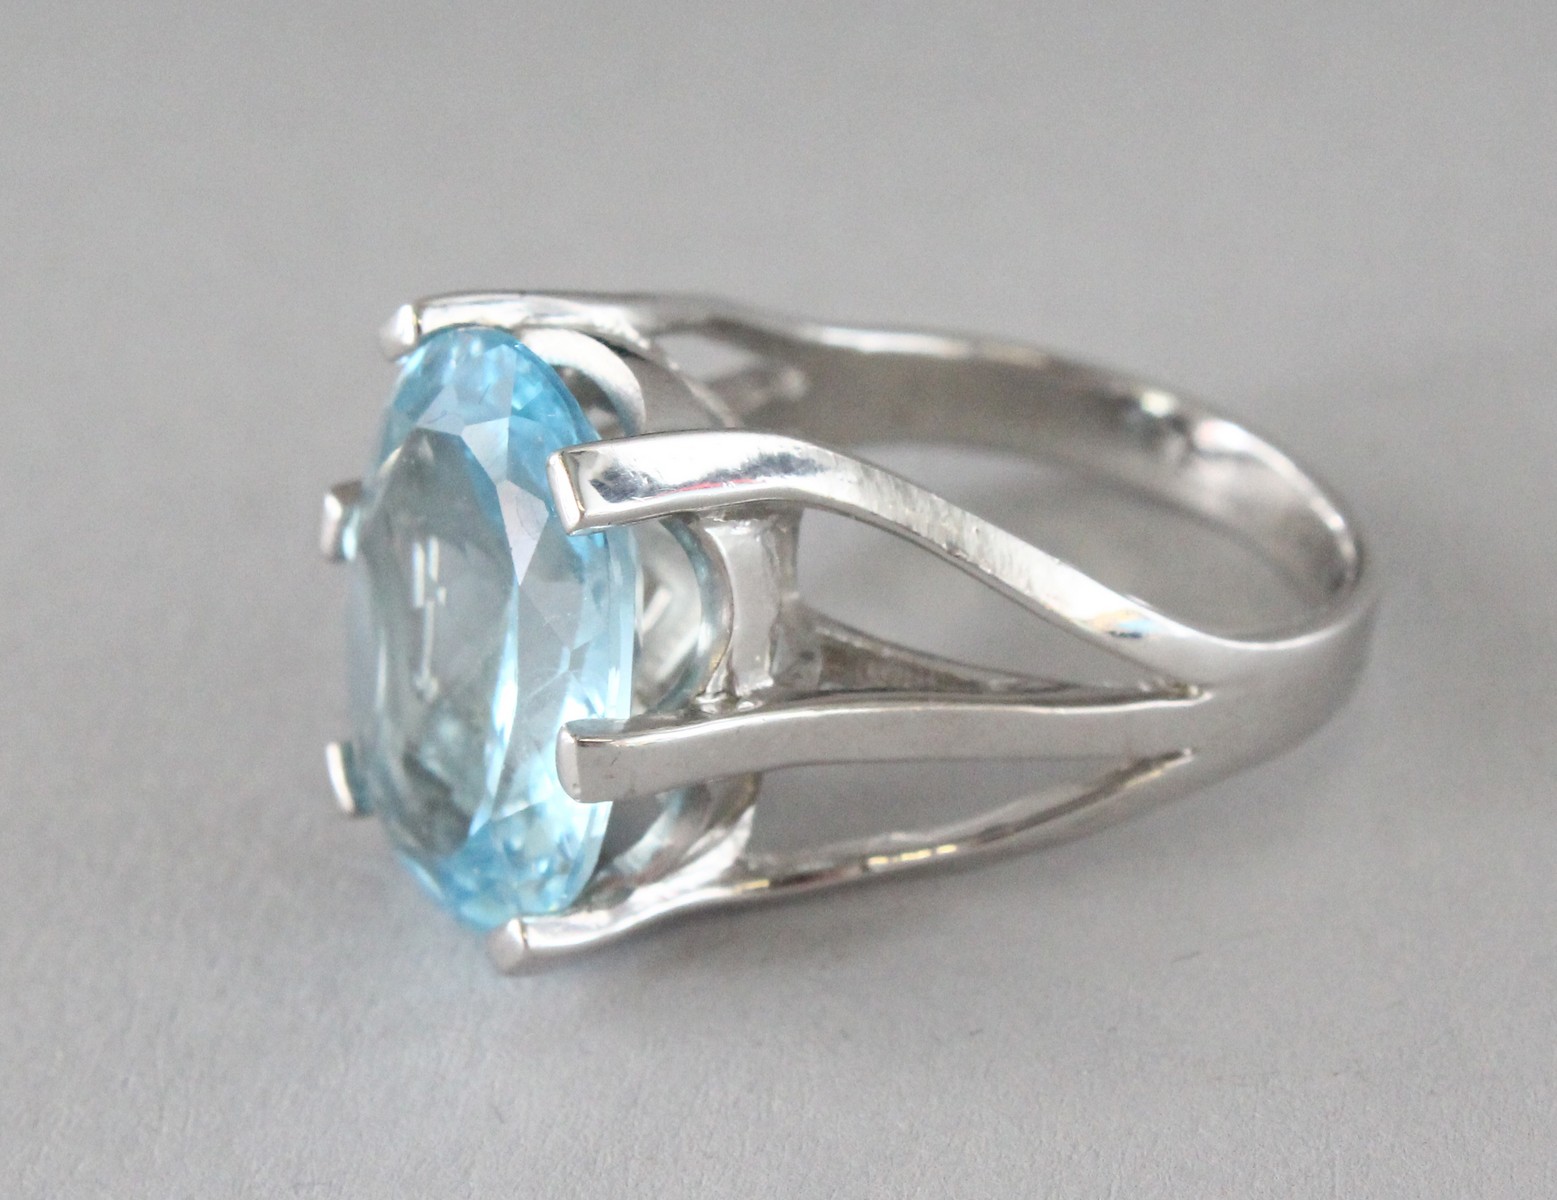 A SILVER LARGE OVAL CUT TOPAZ RING.